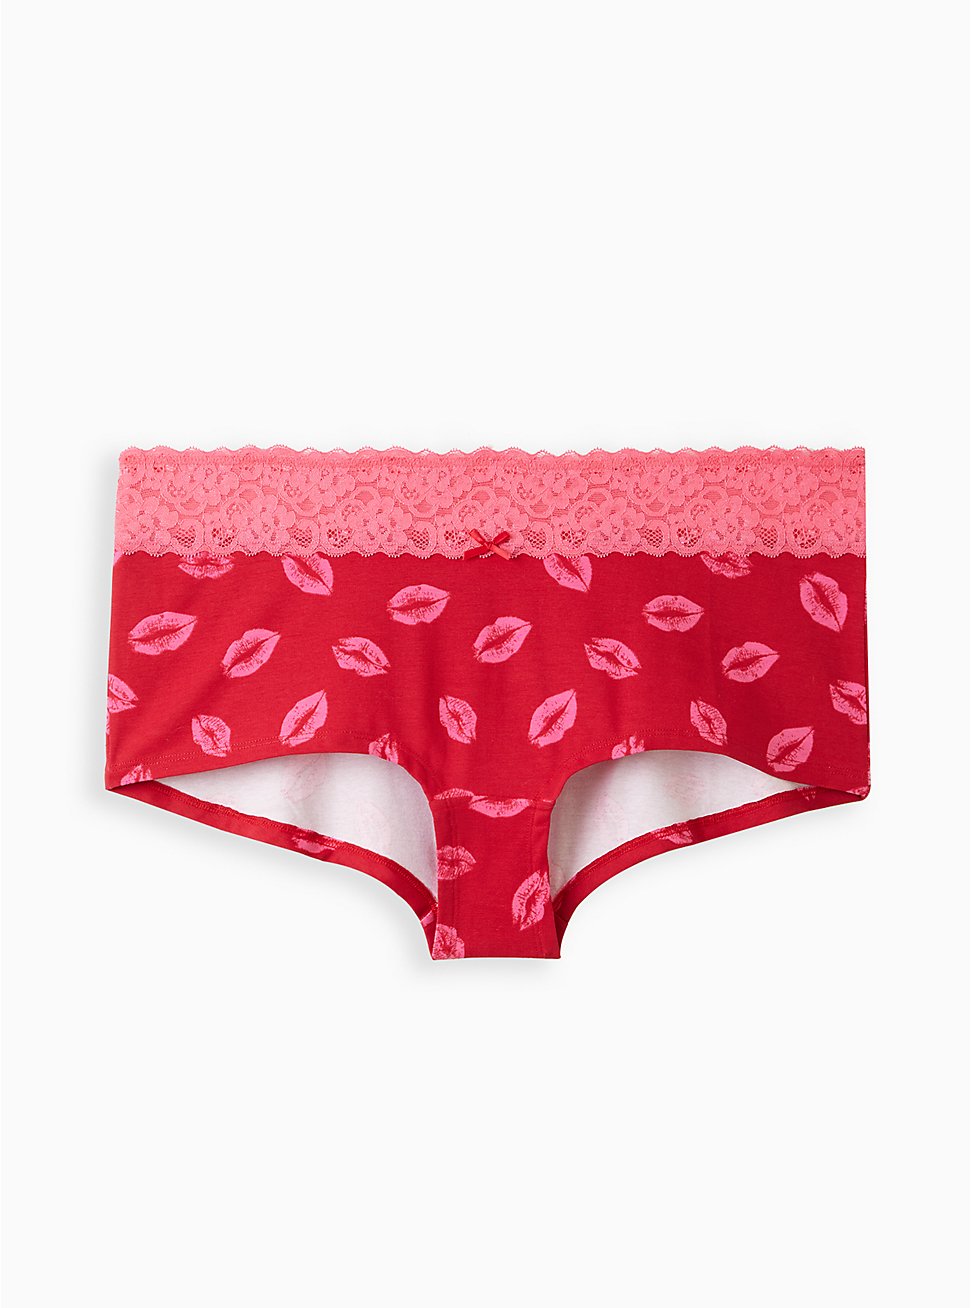 Wide Lace Boyshort Panty - Cotton Lips Red, HOLIDAY LIPS- RED, hi-res